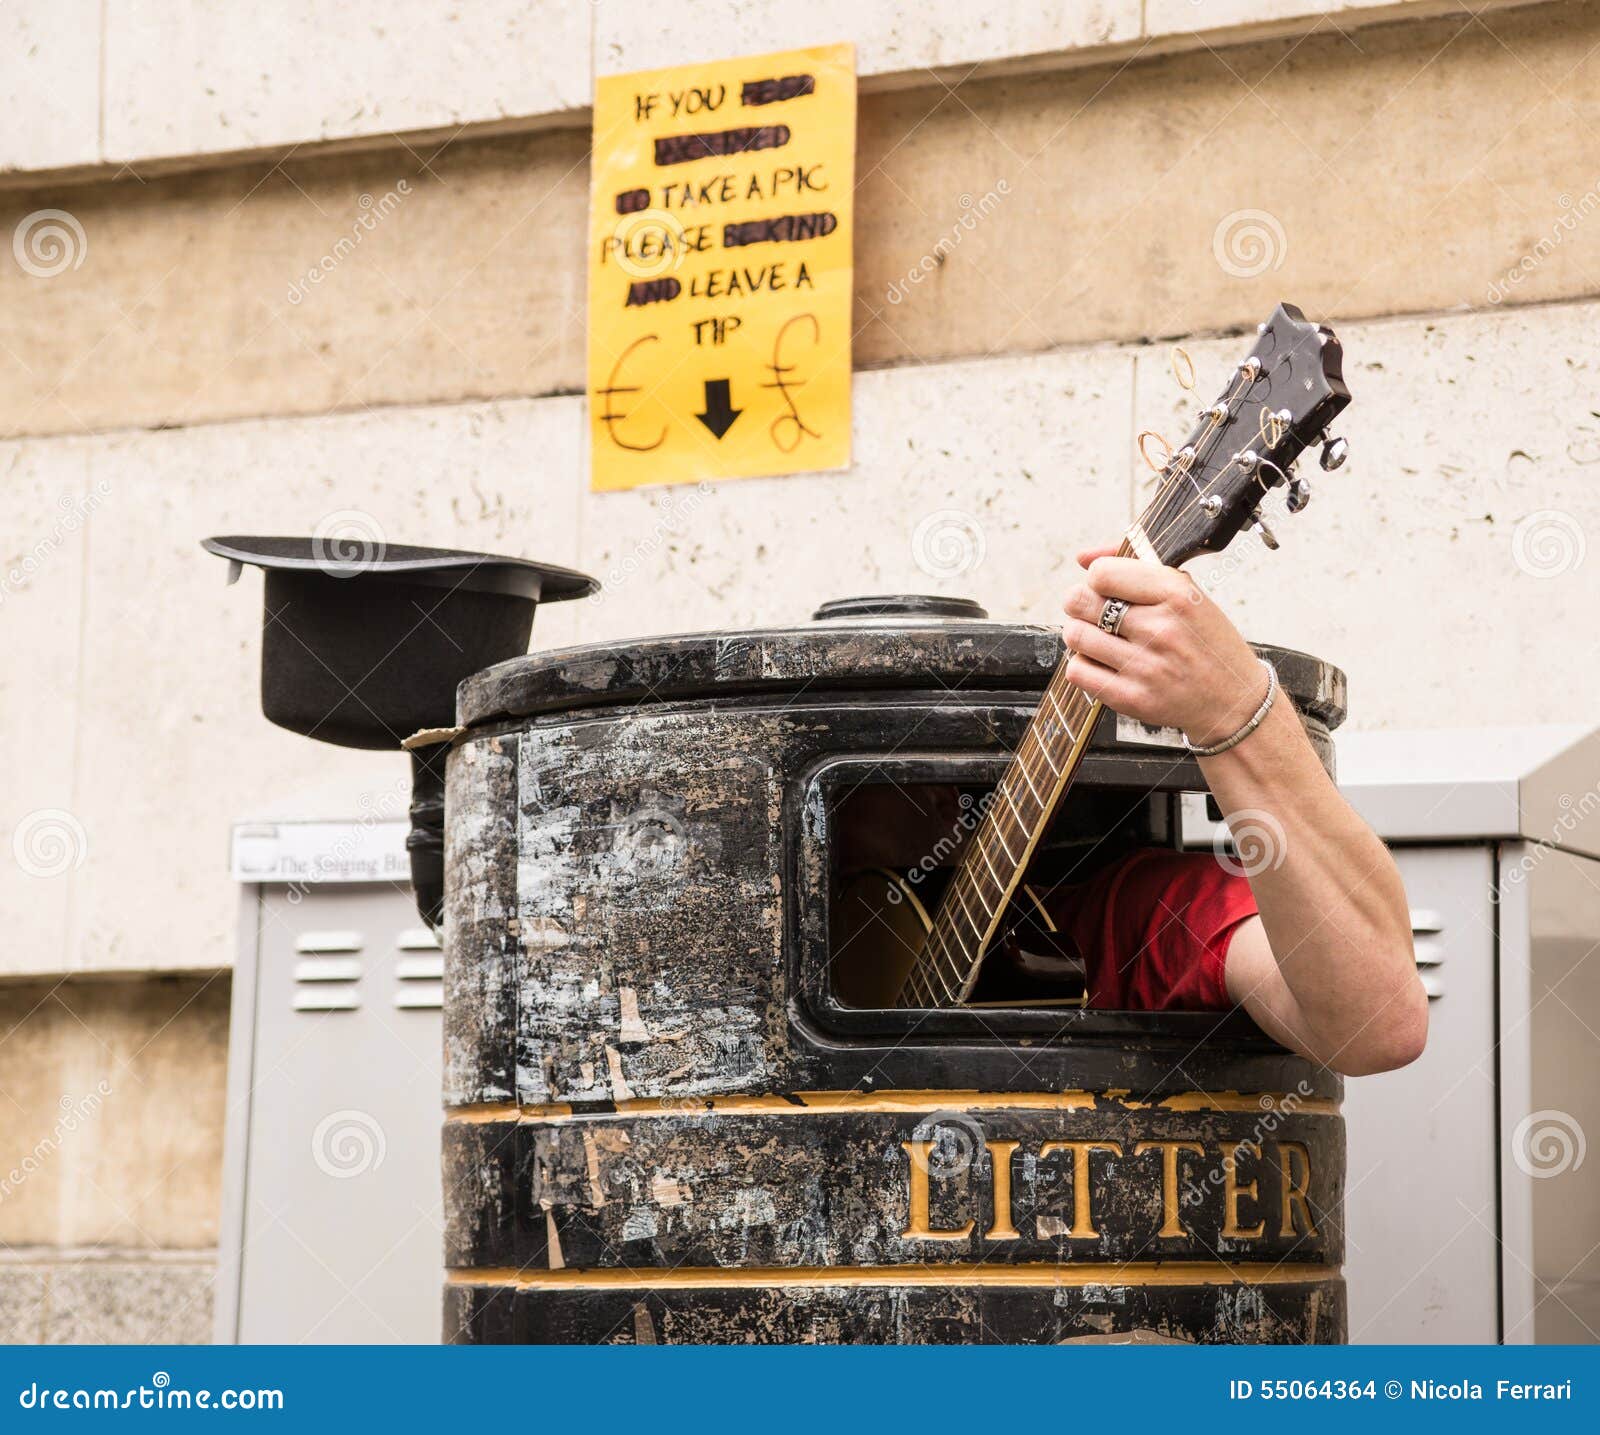 busker singing and playing guitar inside a rubbish bin